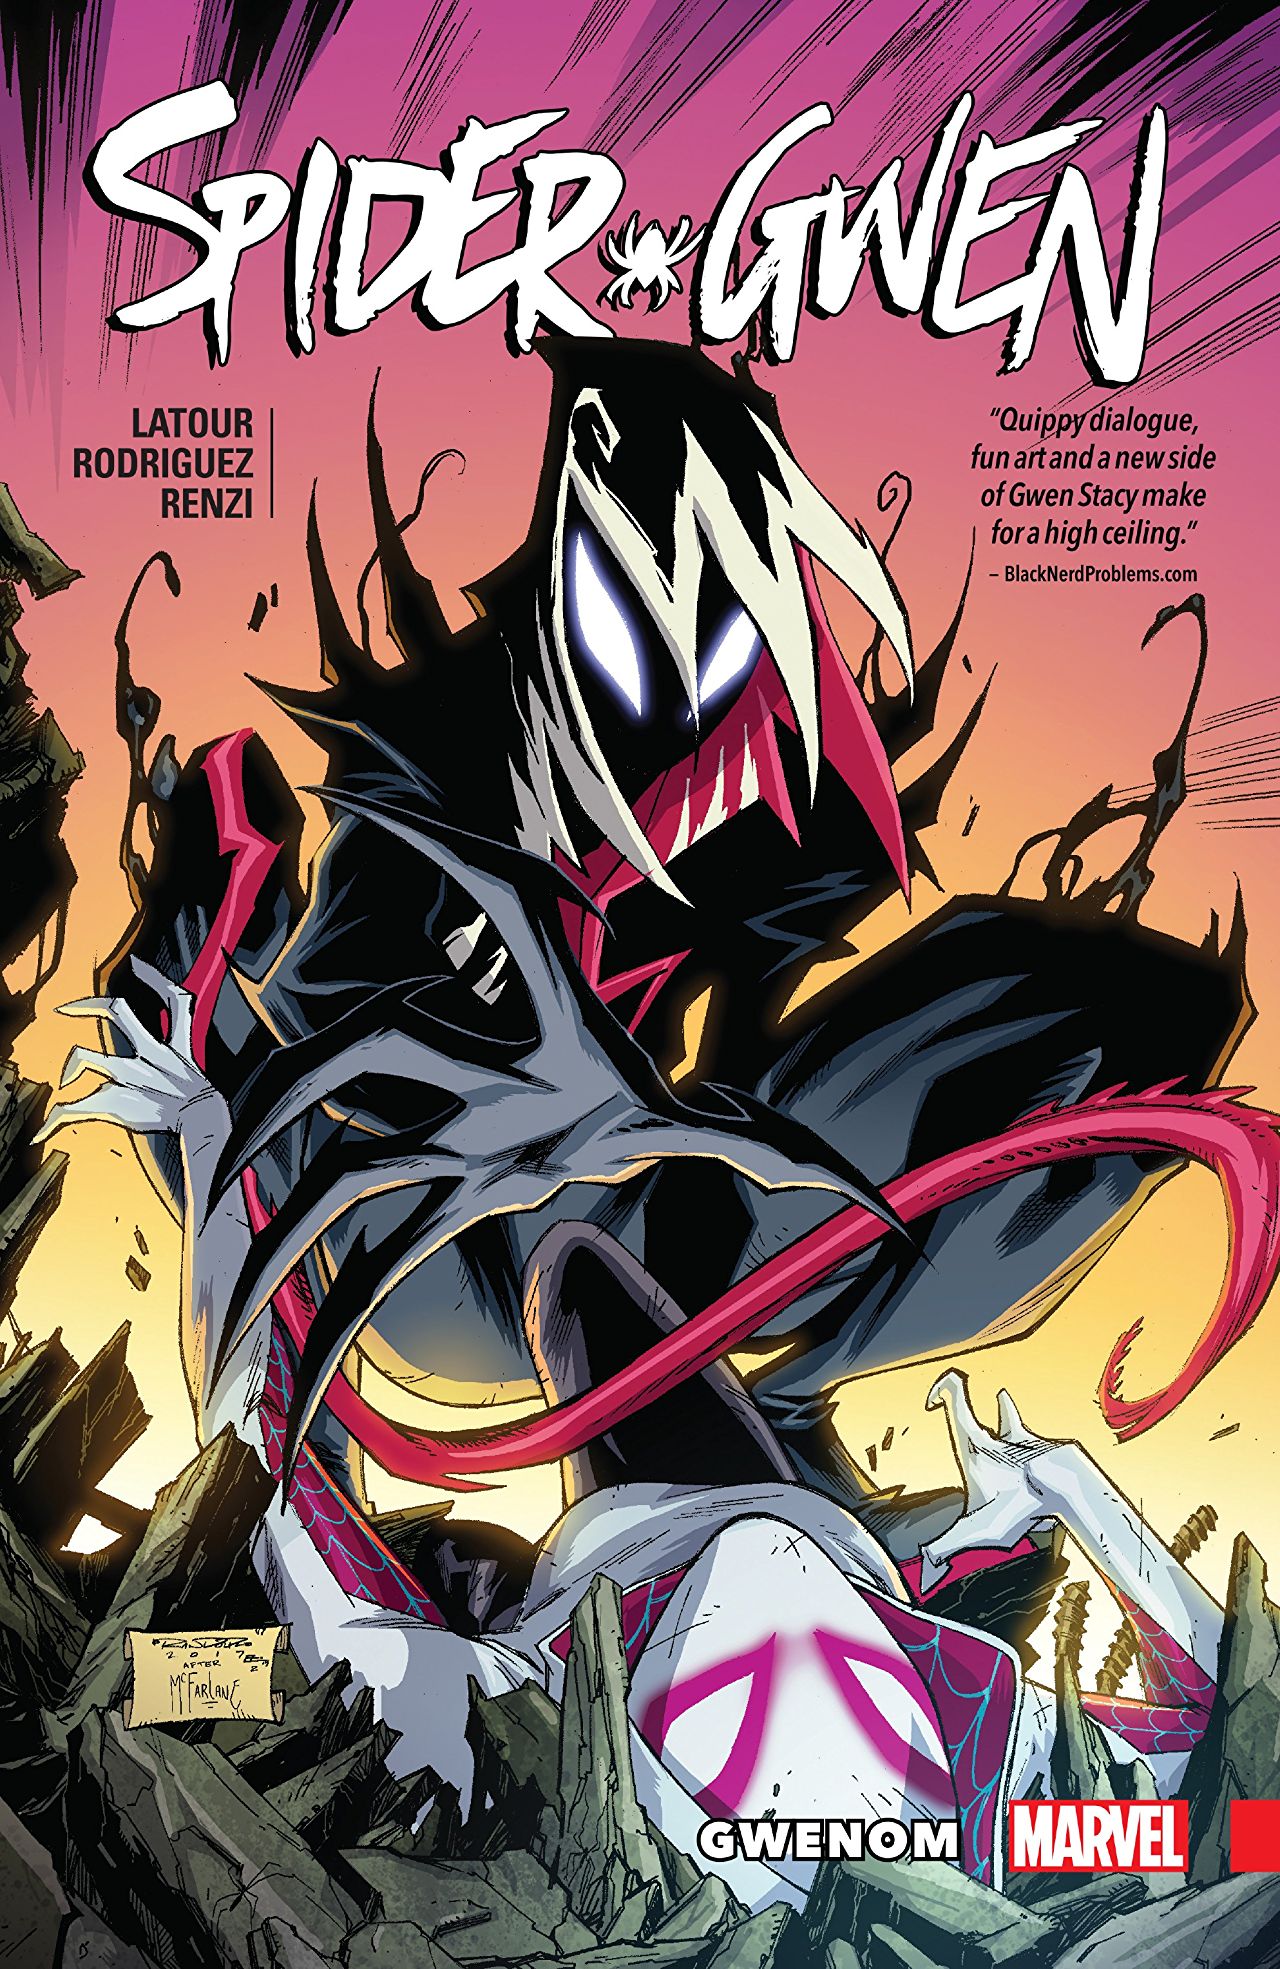 'Spider-Gwen Vol. 5: Gwenom' takes the character to heights (and depths)